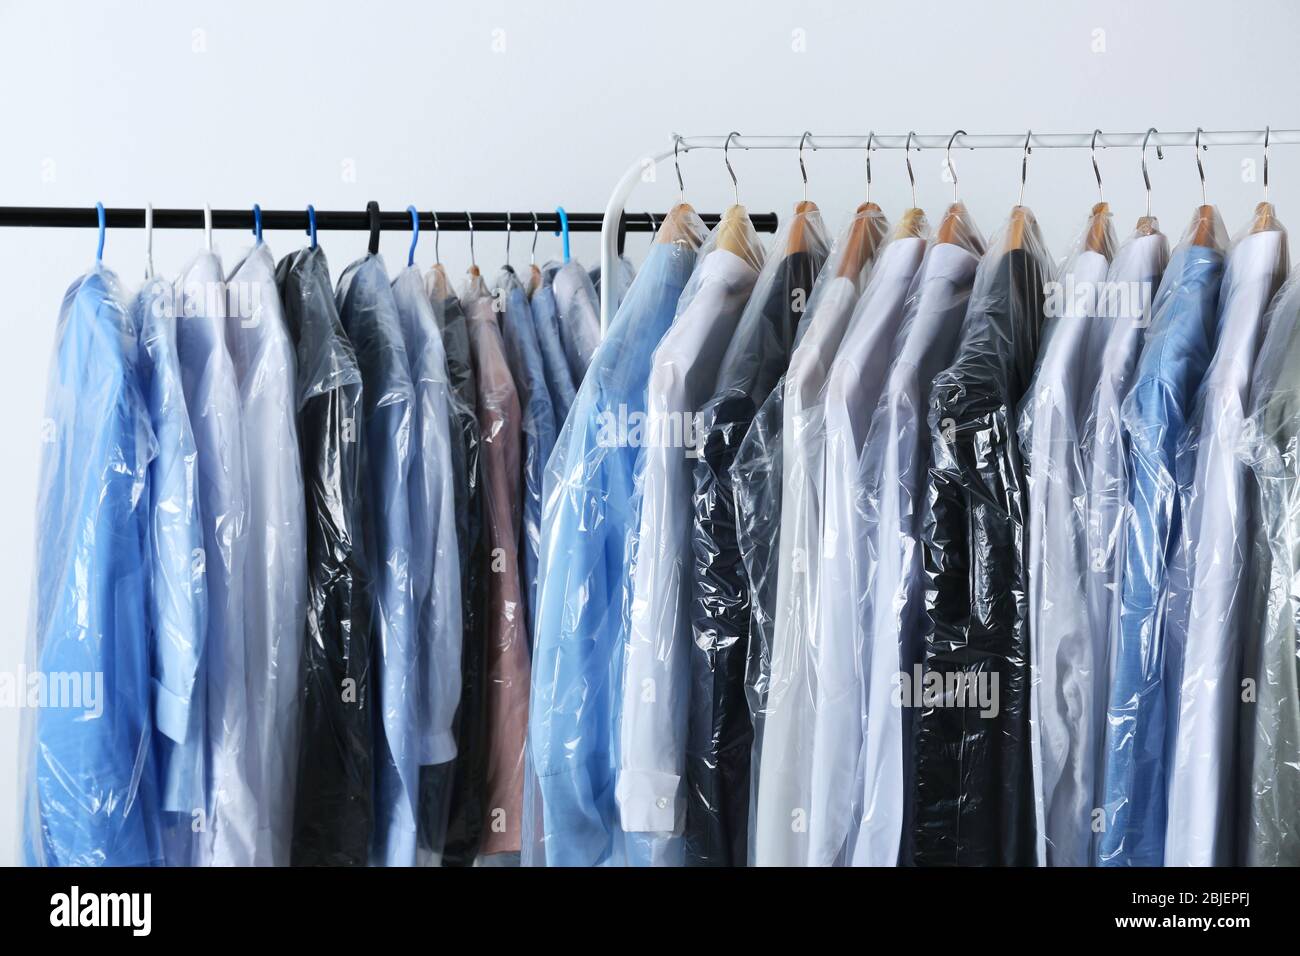 https://c8.alamy.com/comp/2BJEPFJ/rack-of-clean-clothes-hanging-on-hangers-at-dry-cleaning-2BJEPFJ.jpg